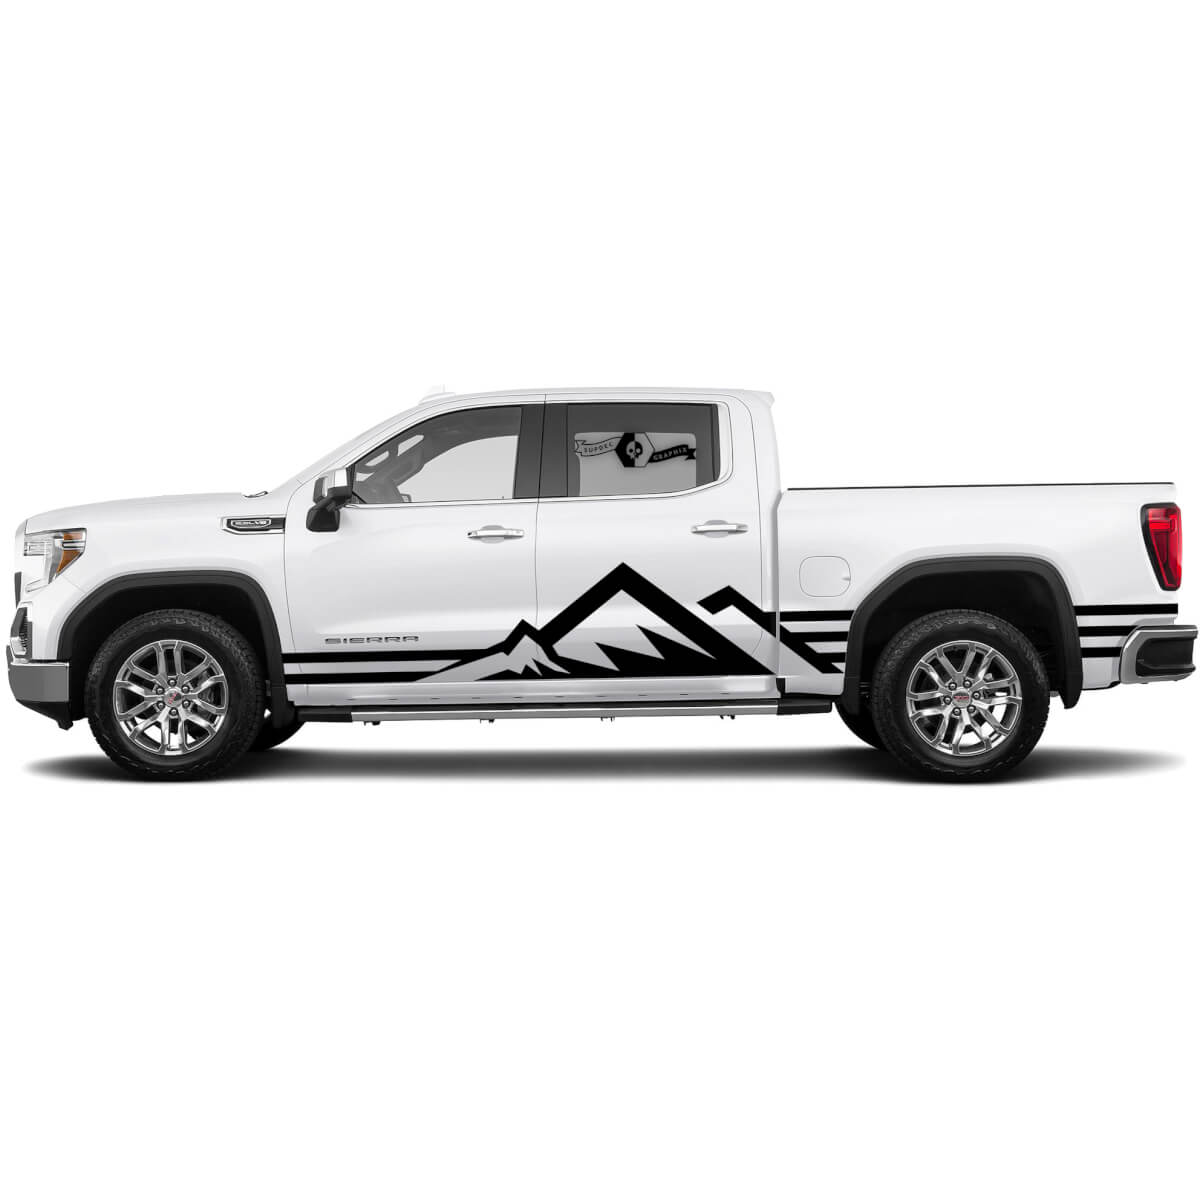 Side Panel Mountains Style Decals For GMC Sierra 1